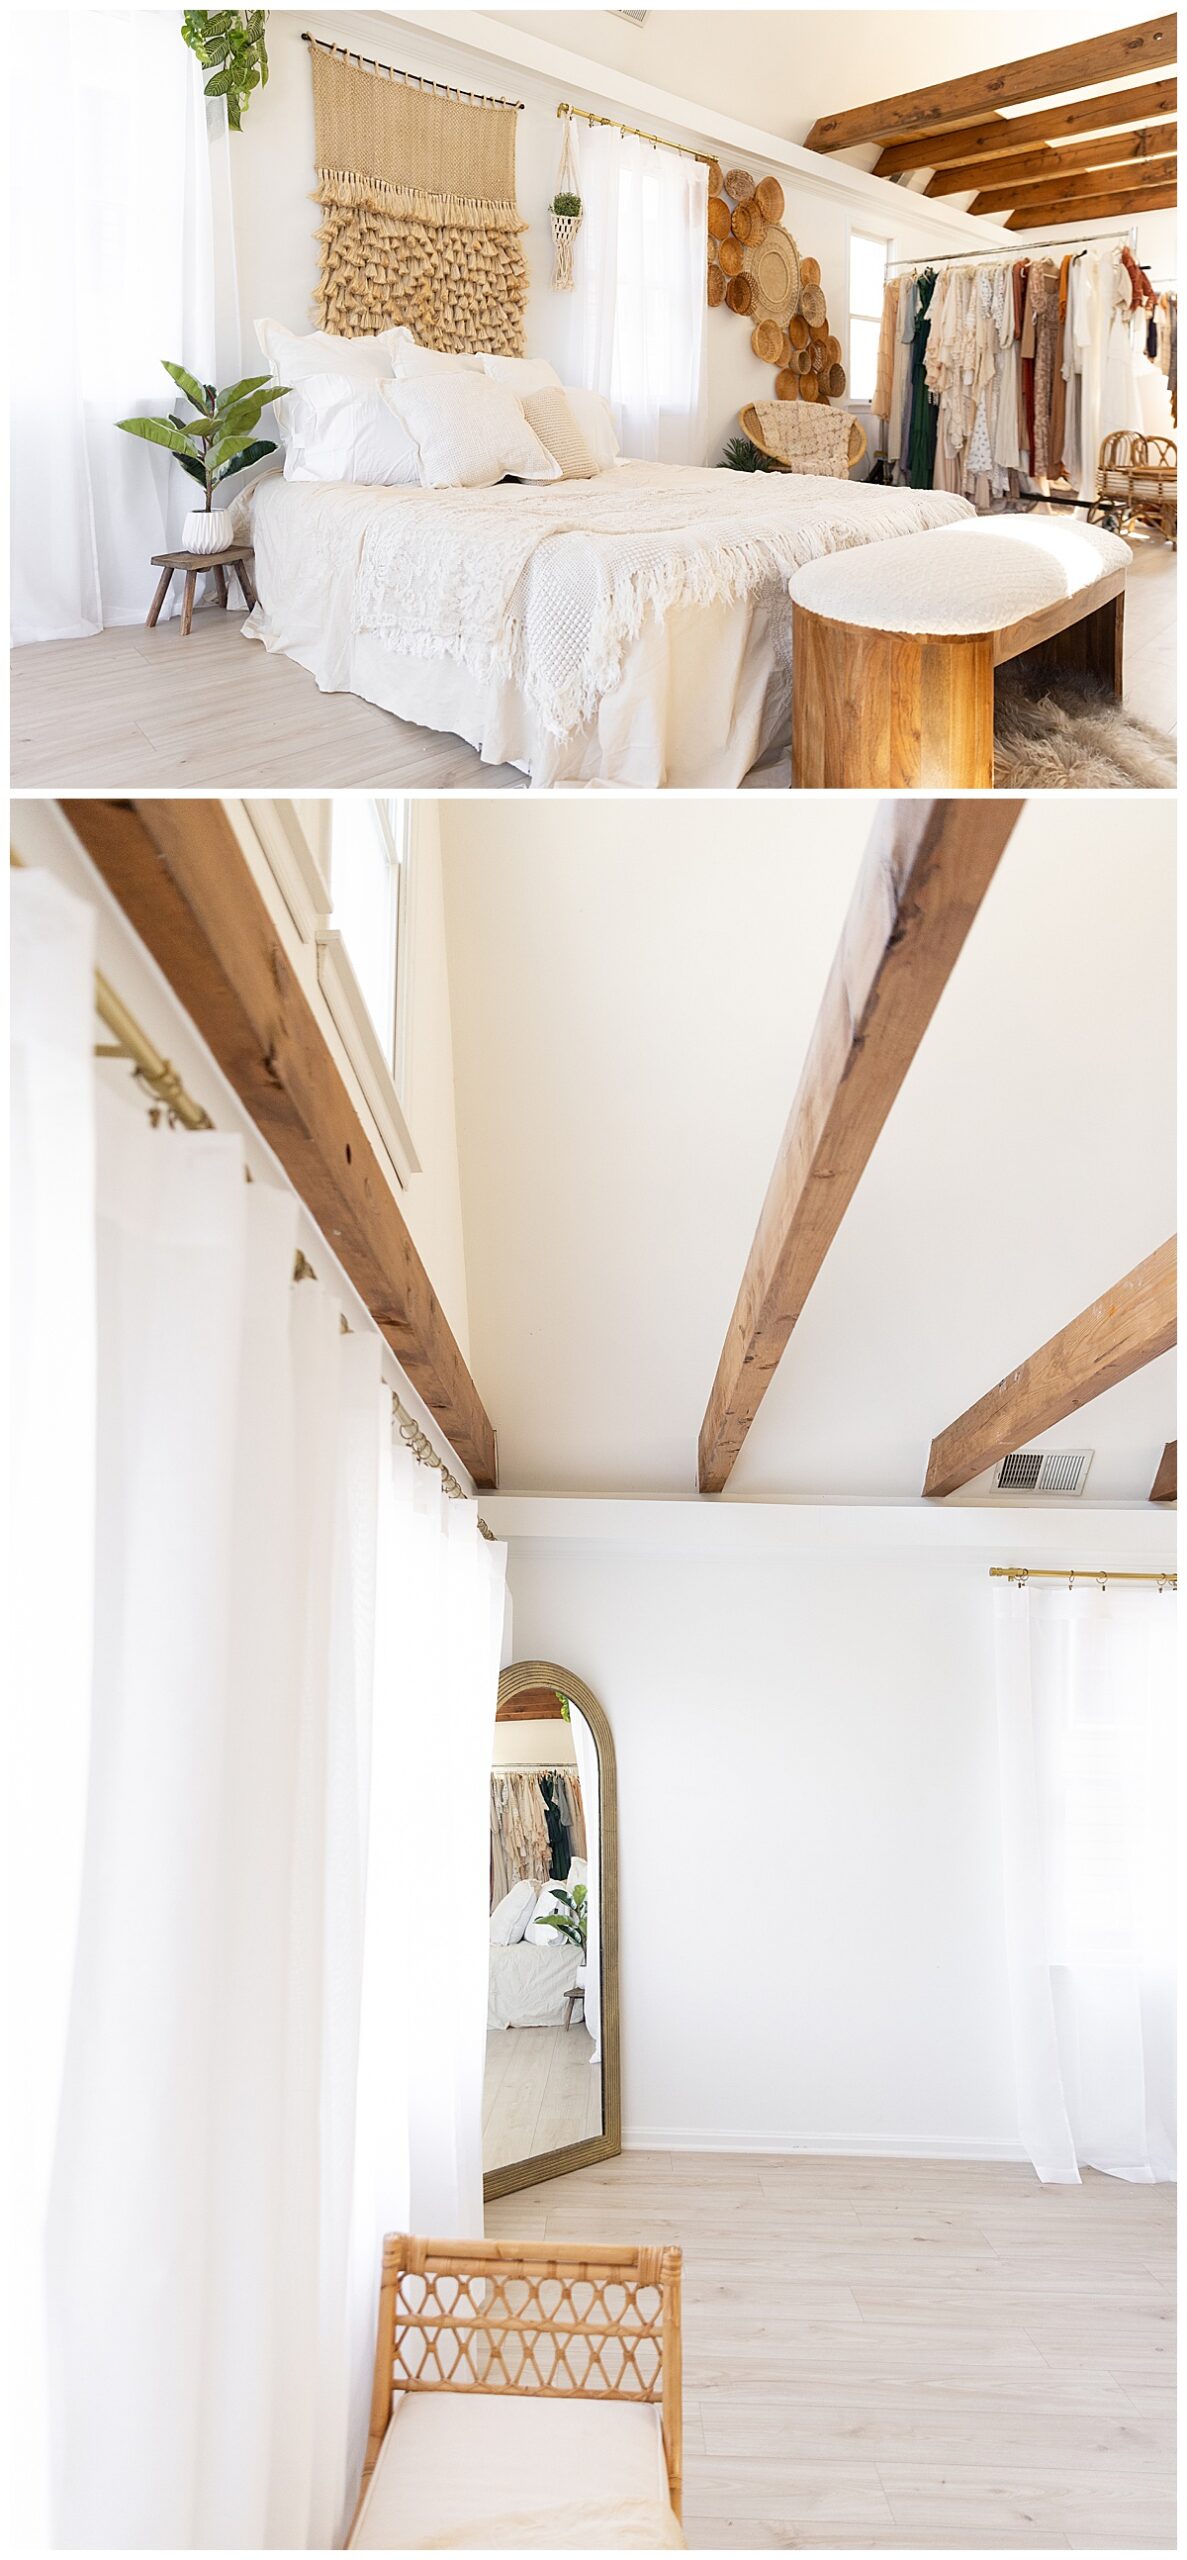 White ceilings and walls with wood accents for Virginia Newborn Photographer